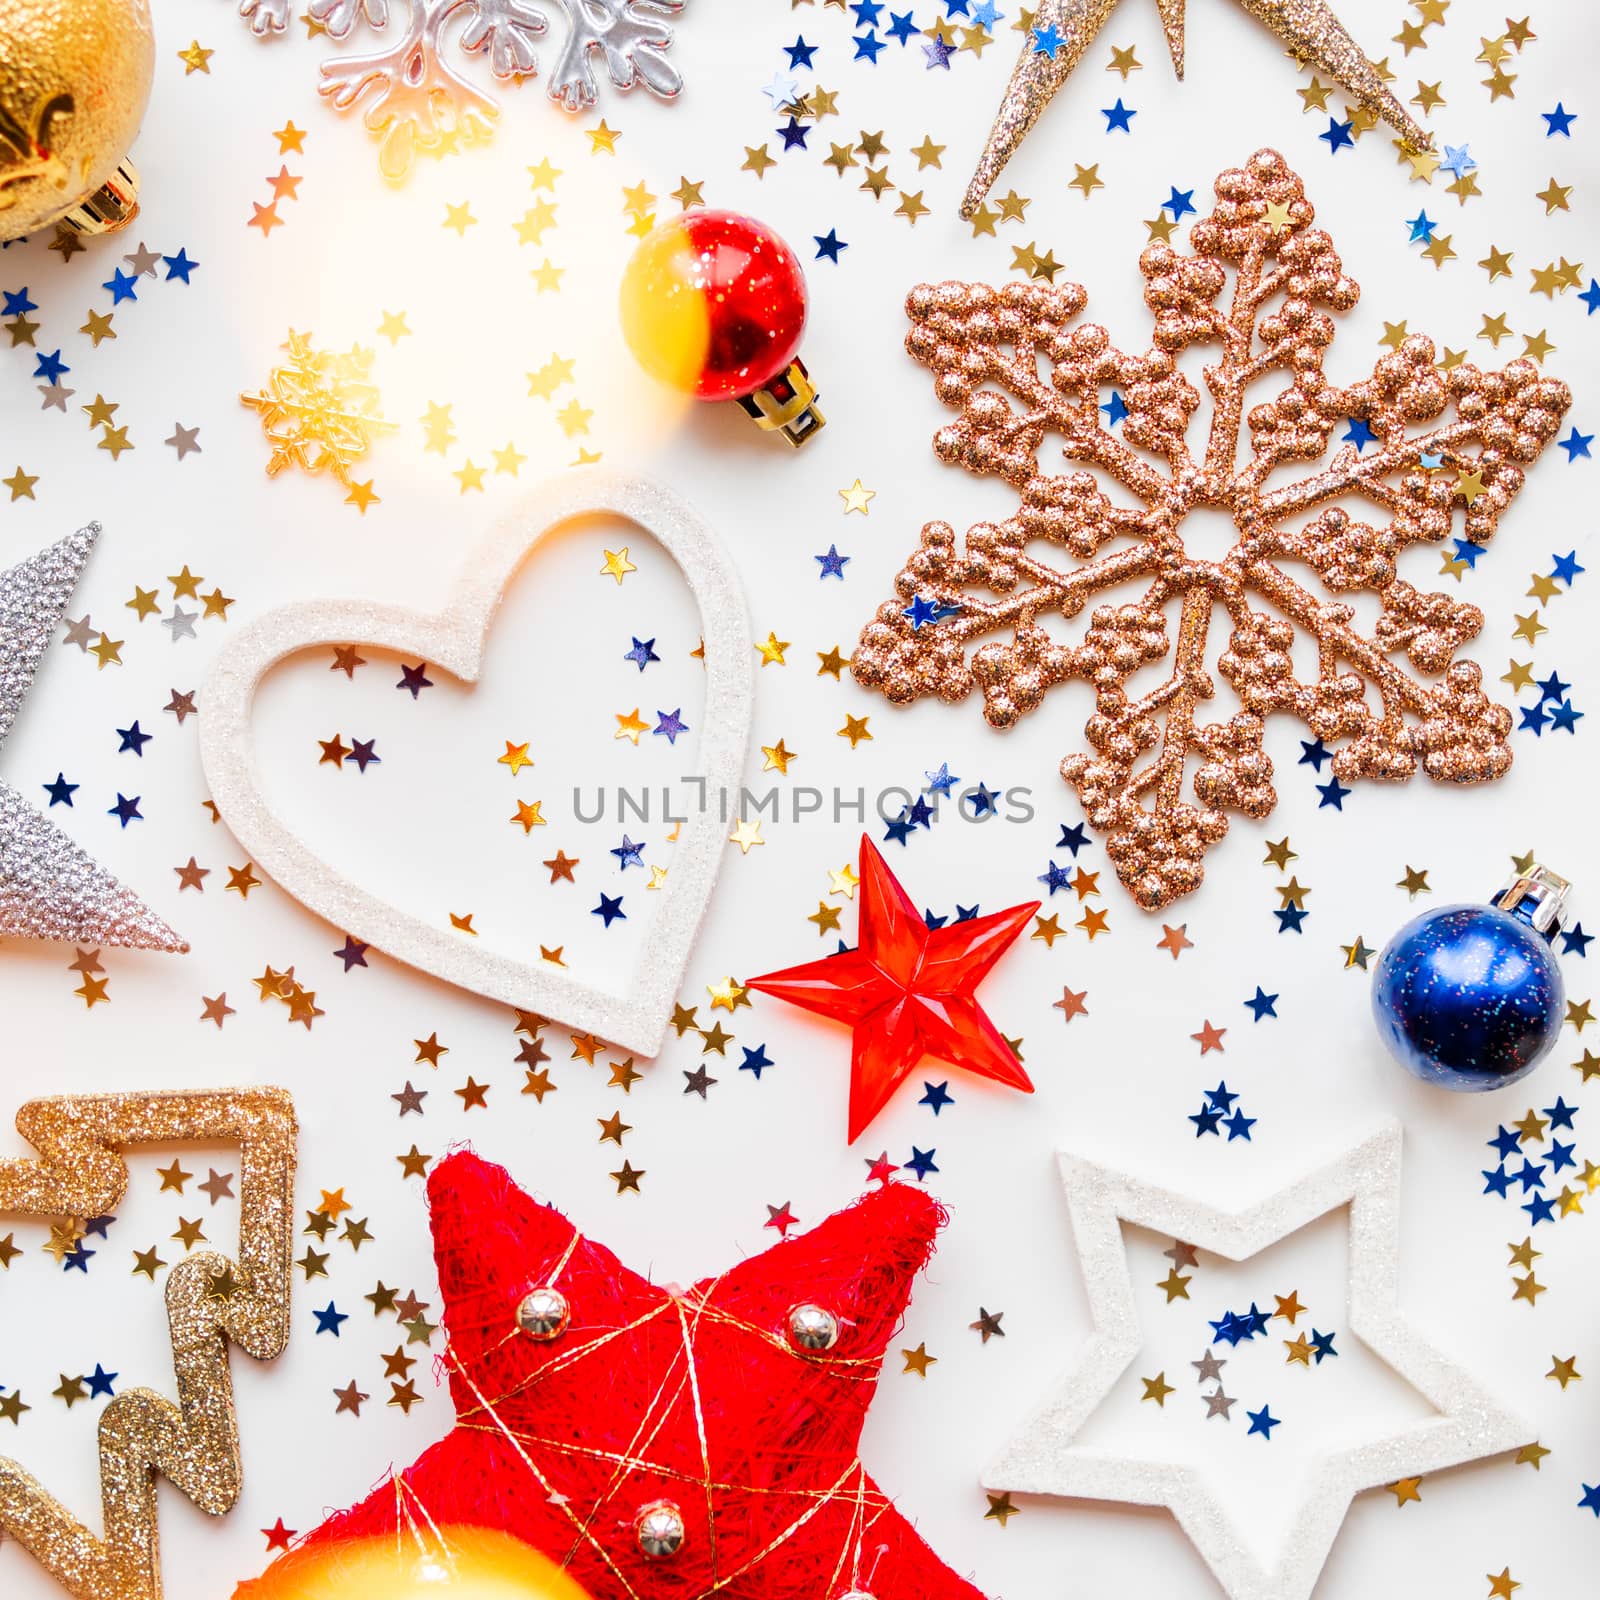 Christmas and New Year background with decorations - shiny stars, balls, snowflakes, light bulbs and confetti. by aksenovko